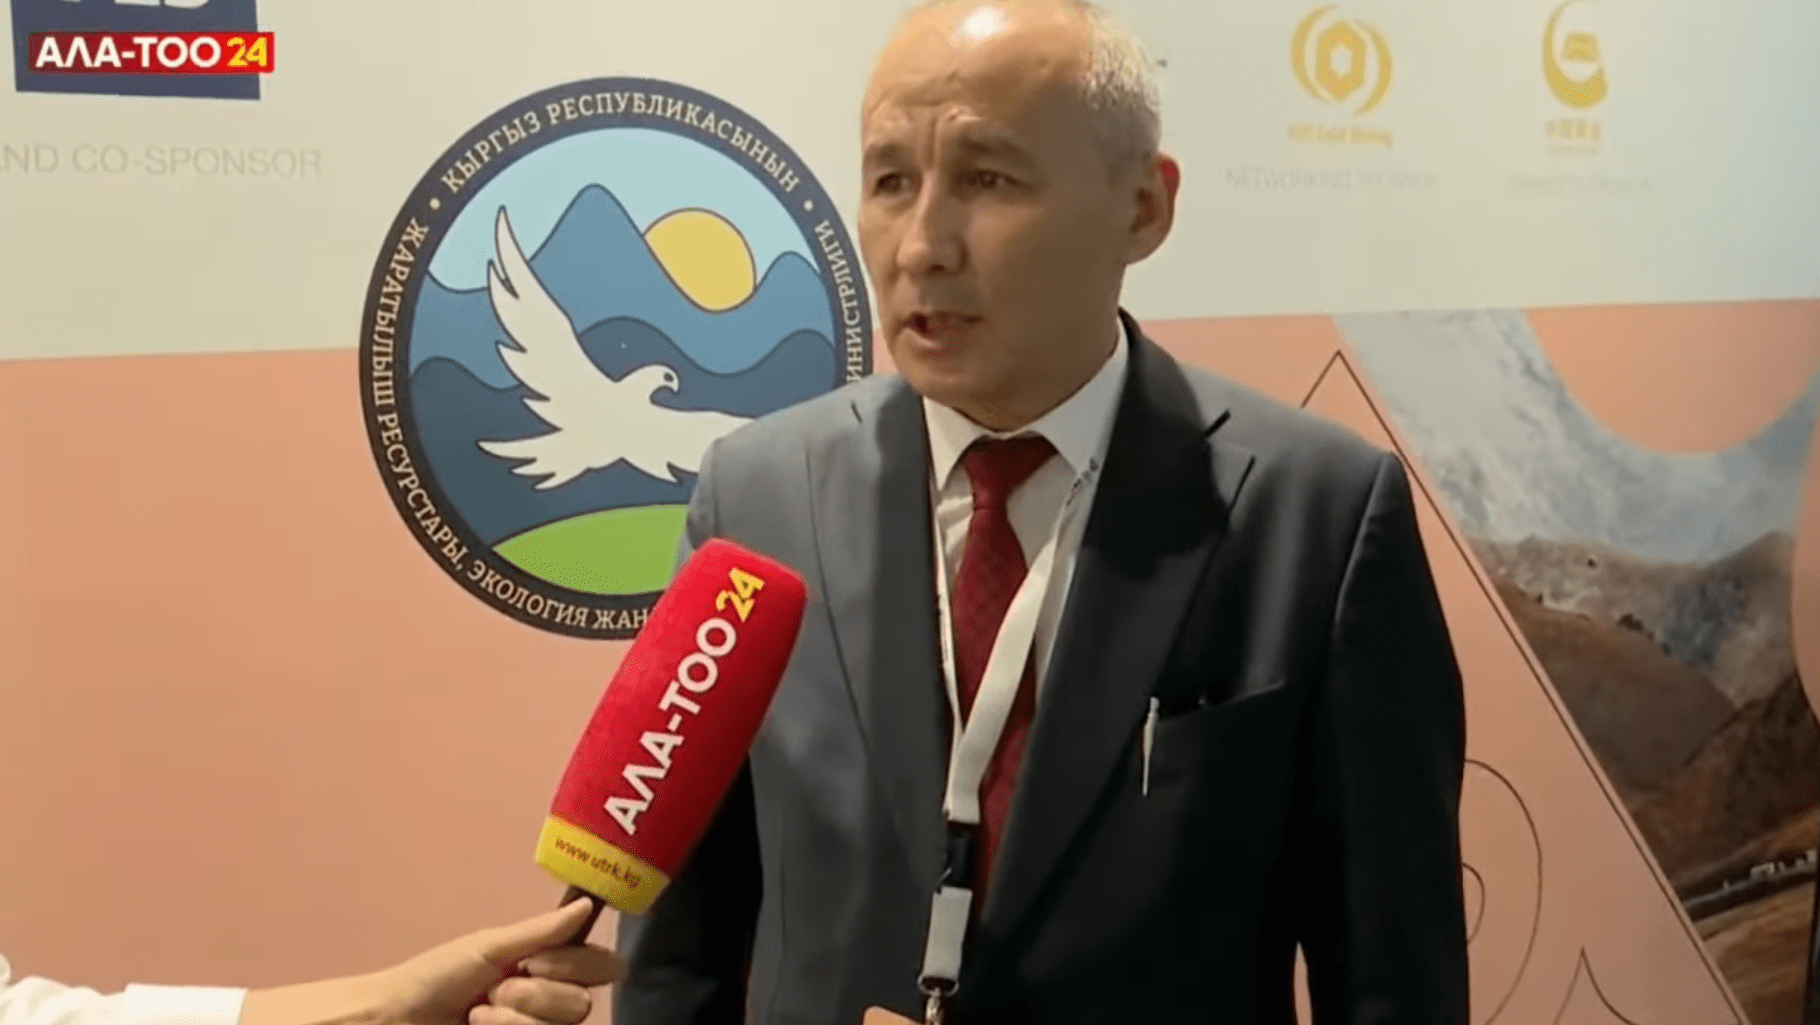 Interview with the Head of Kyrgyz Geological service Meder Mashiev